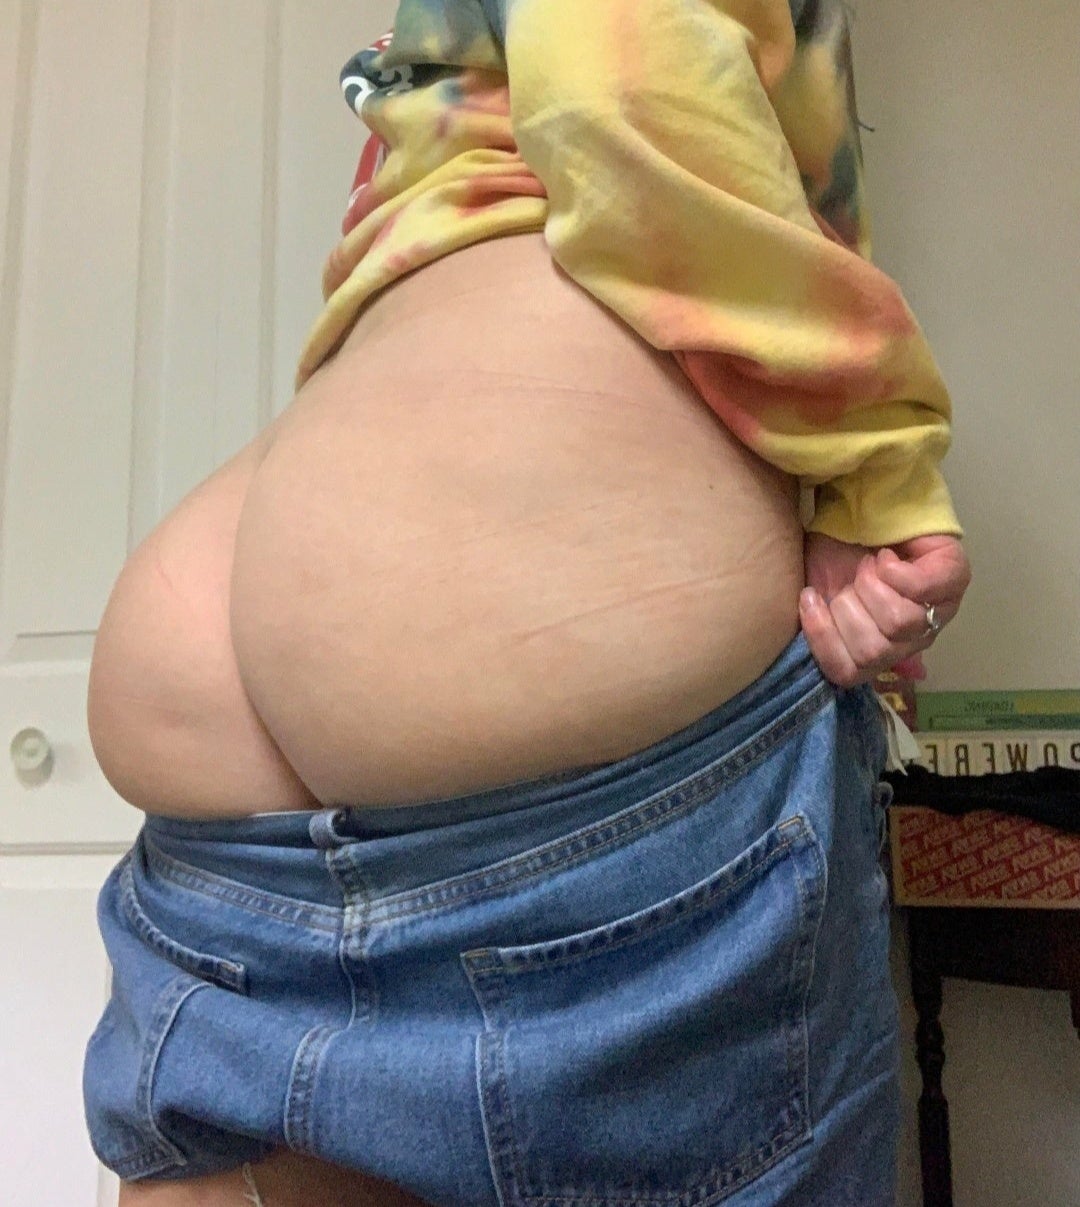 Would you help me fit all this ass into these